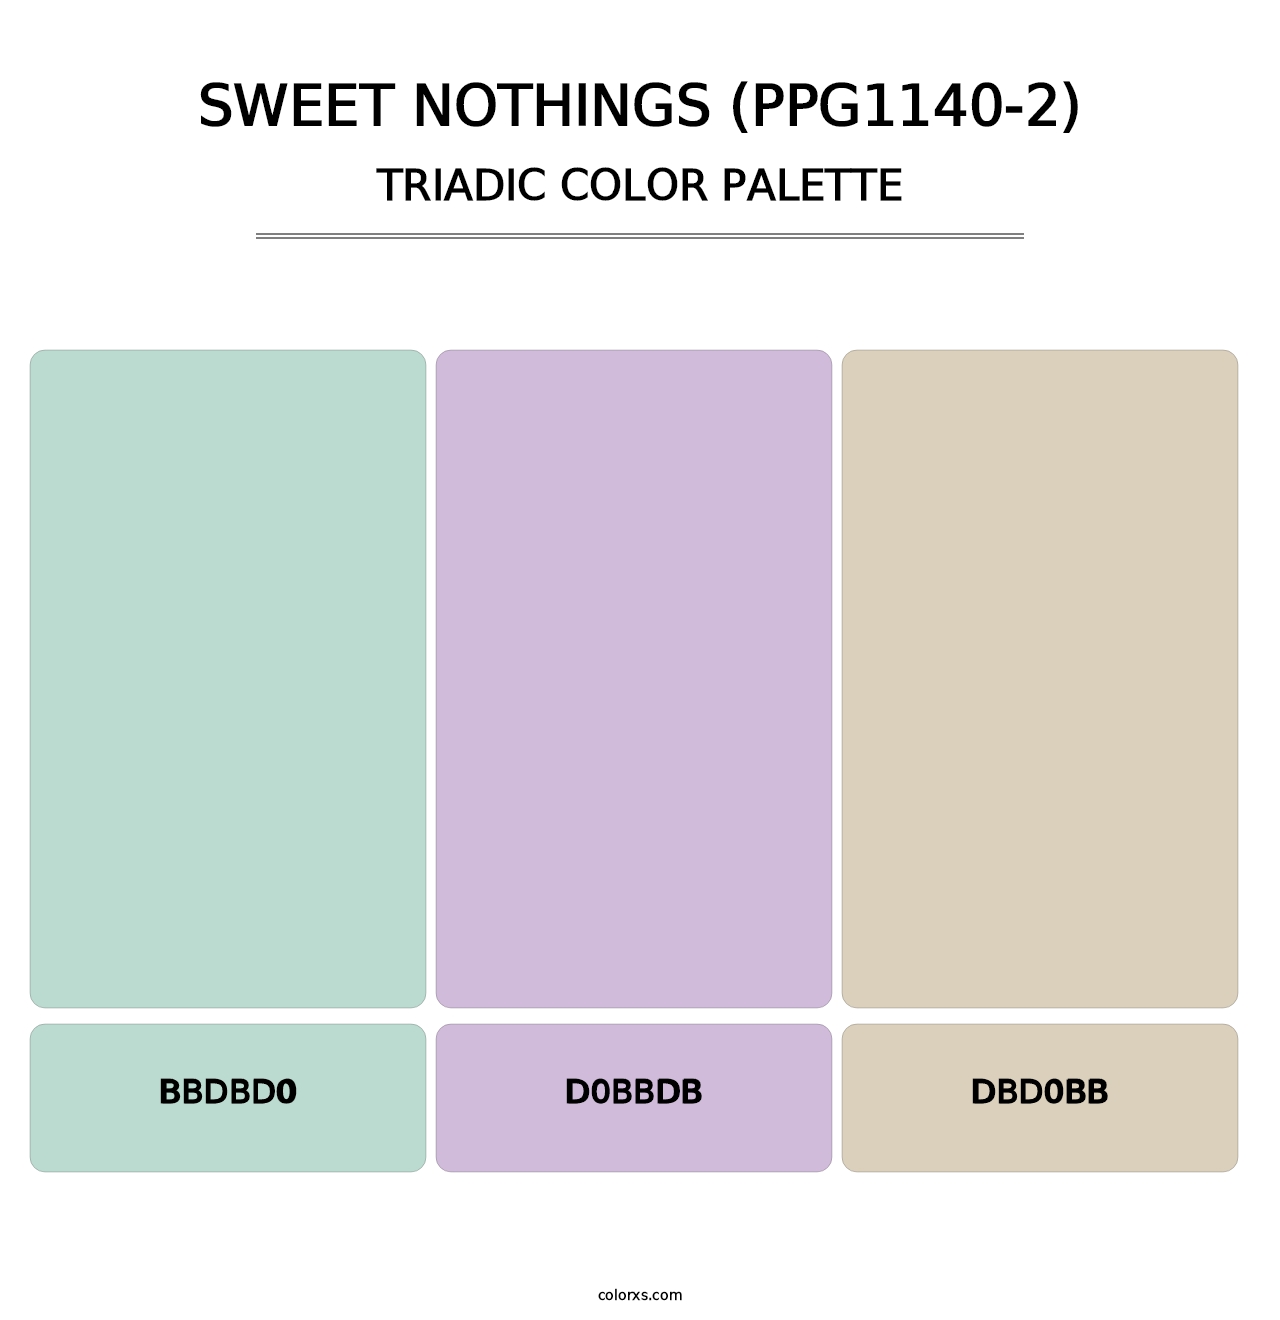 Sweet Nothings (PPG1140-2) - Triadic Color Palette